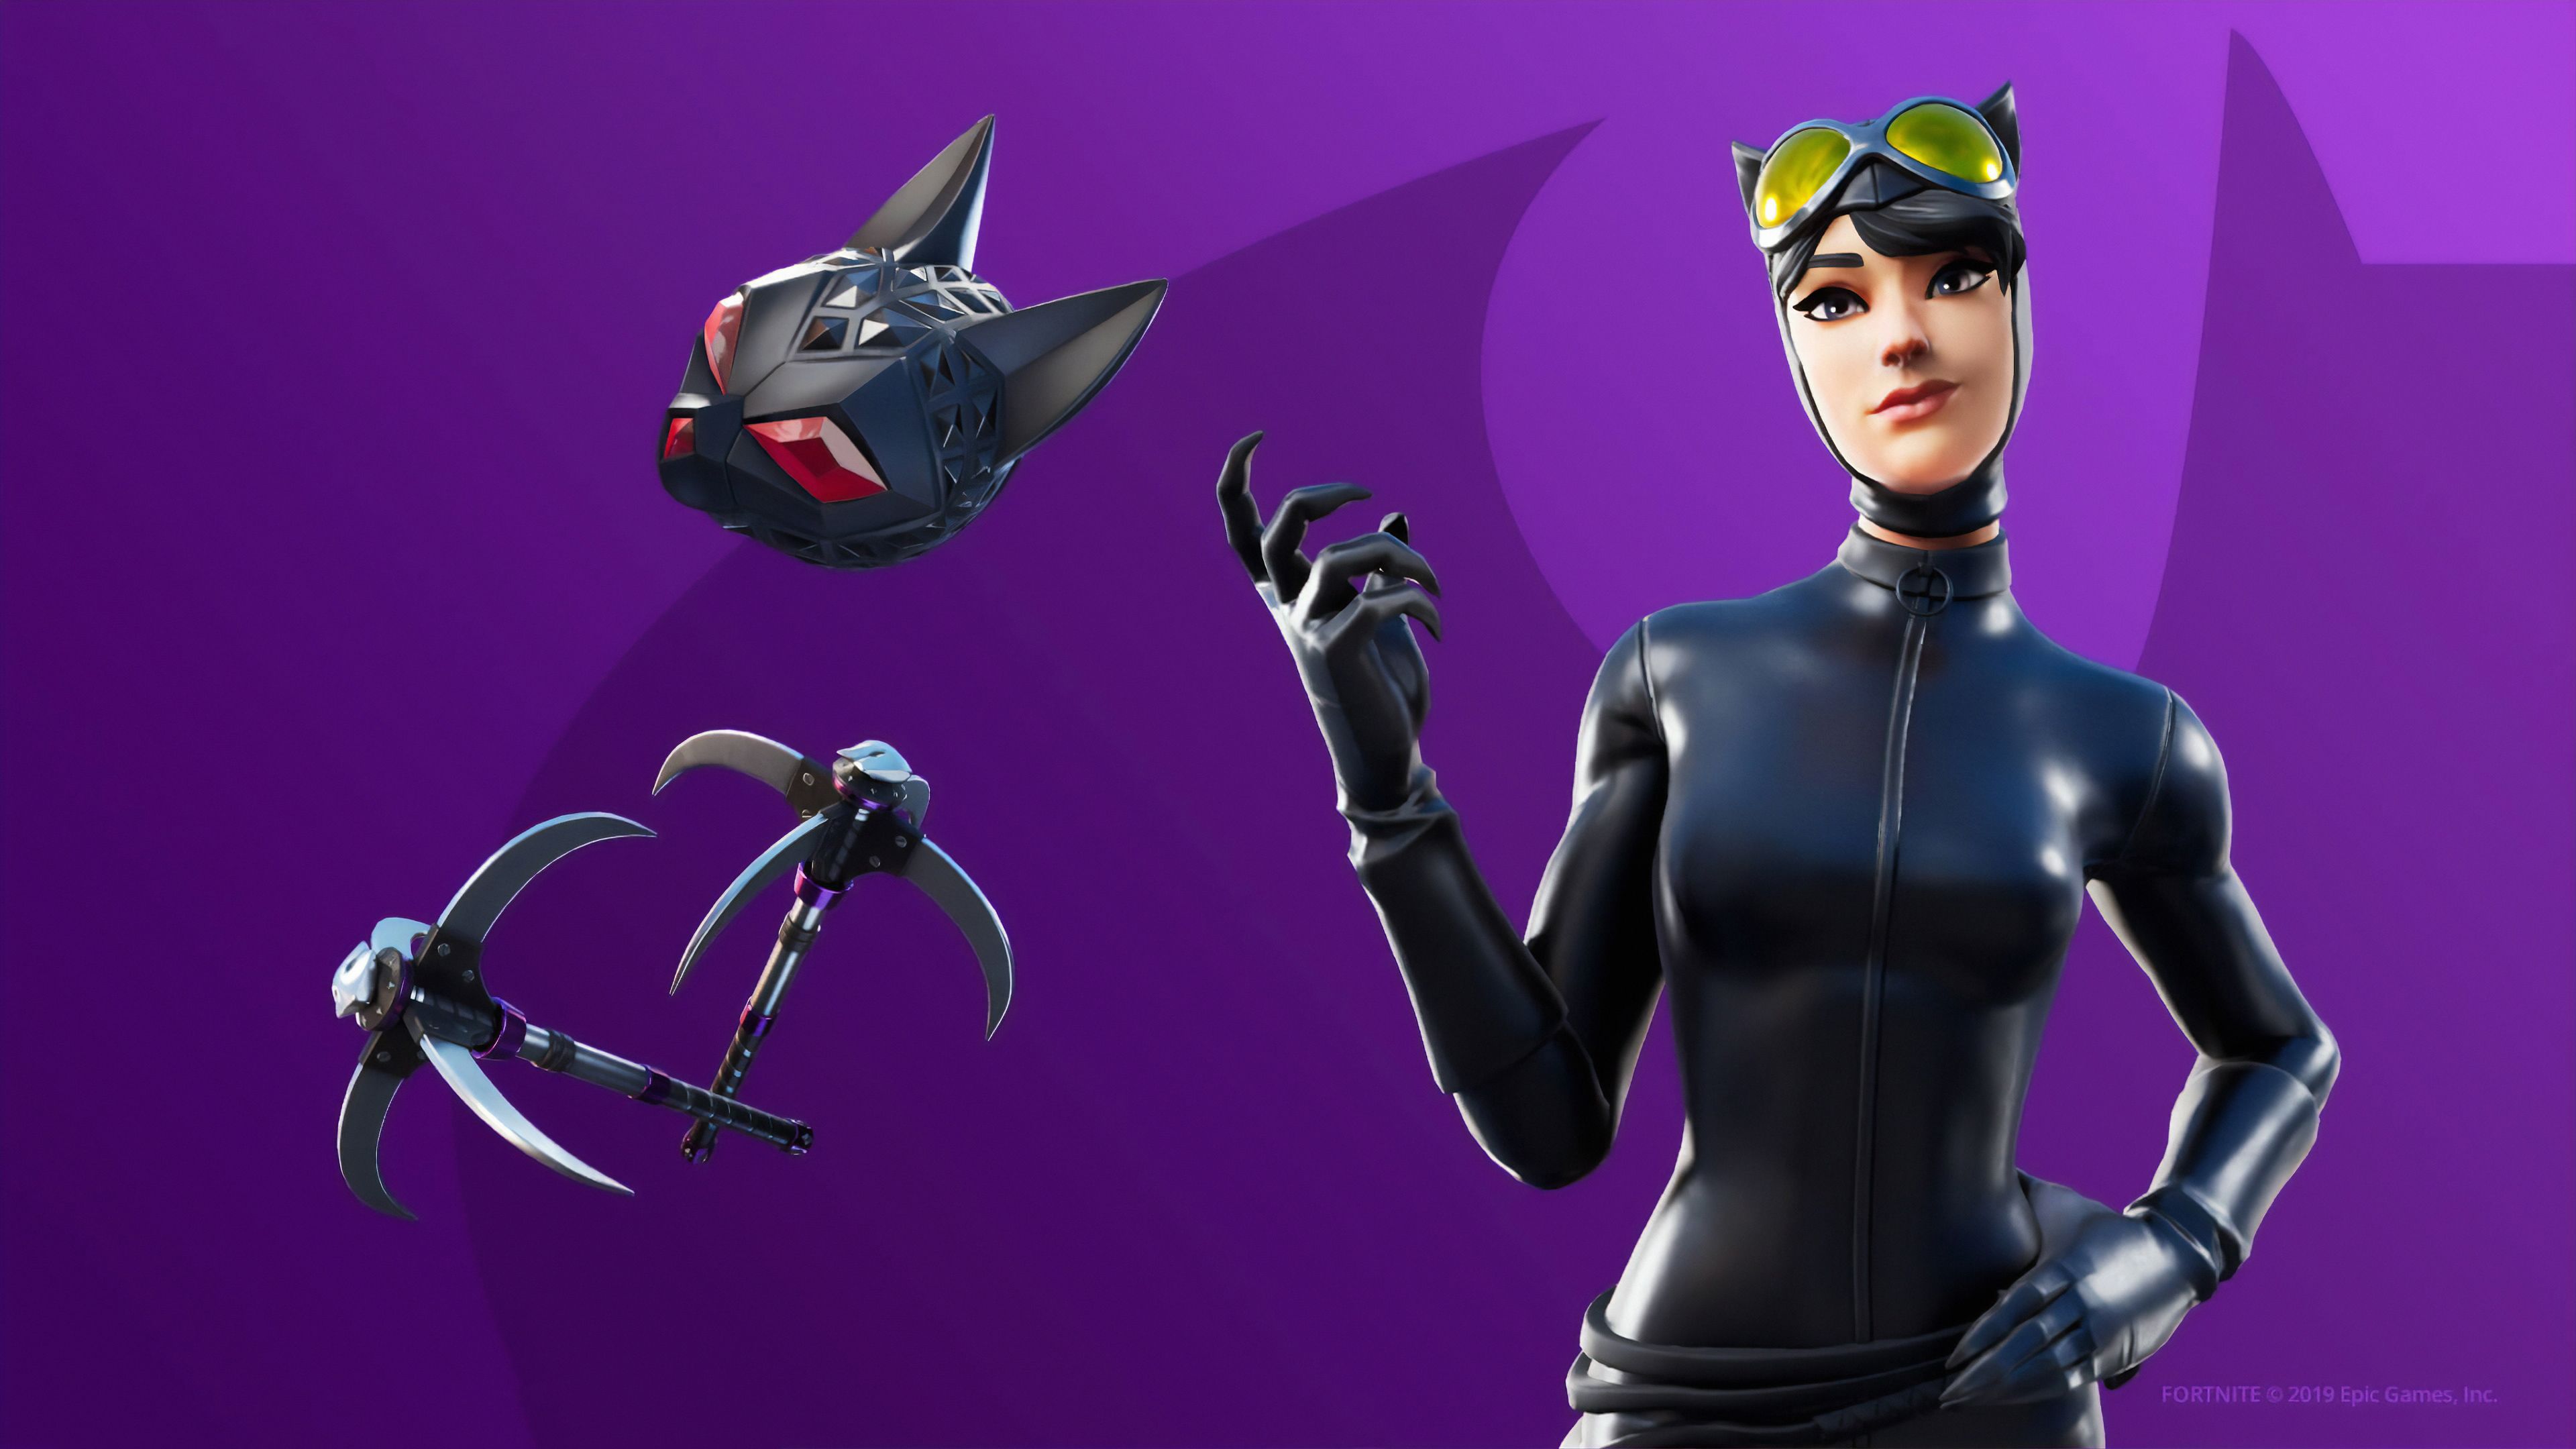 Fortnite Catwoman Wallpaper, HD Games 4K Wallpaper, Image, Photo and Background